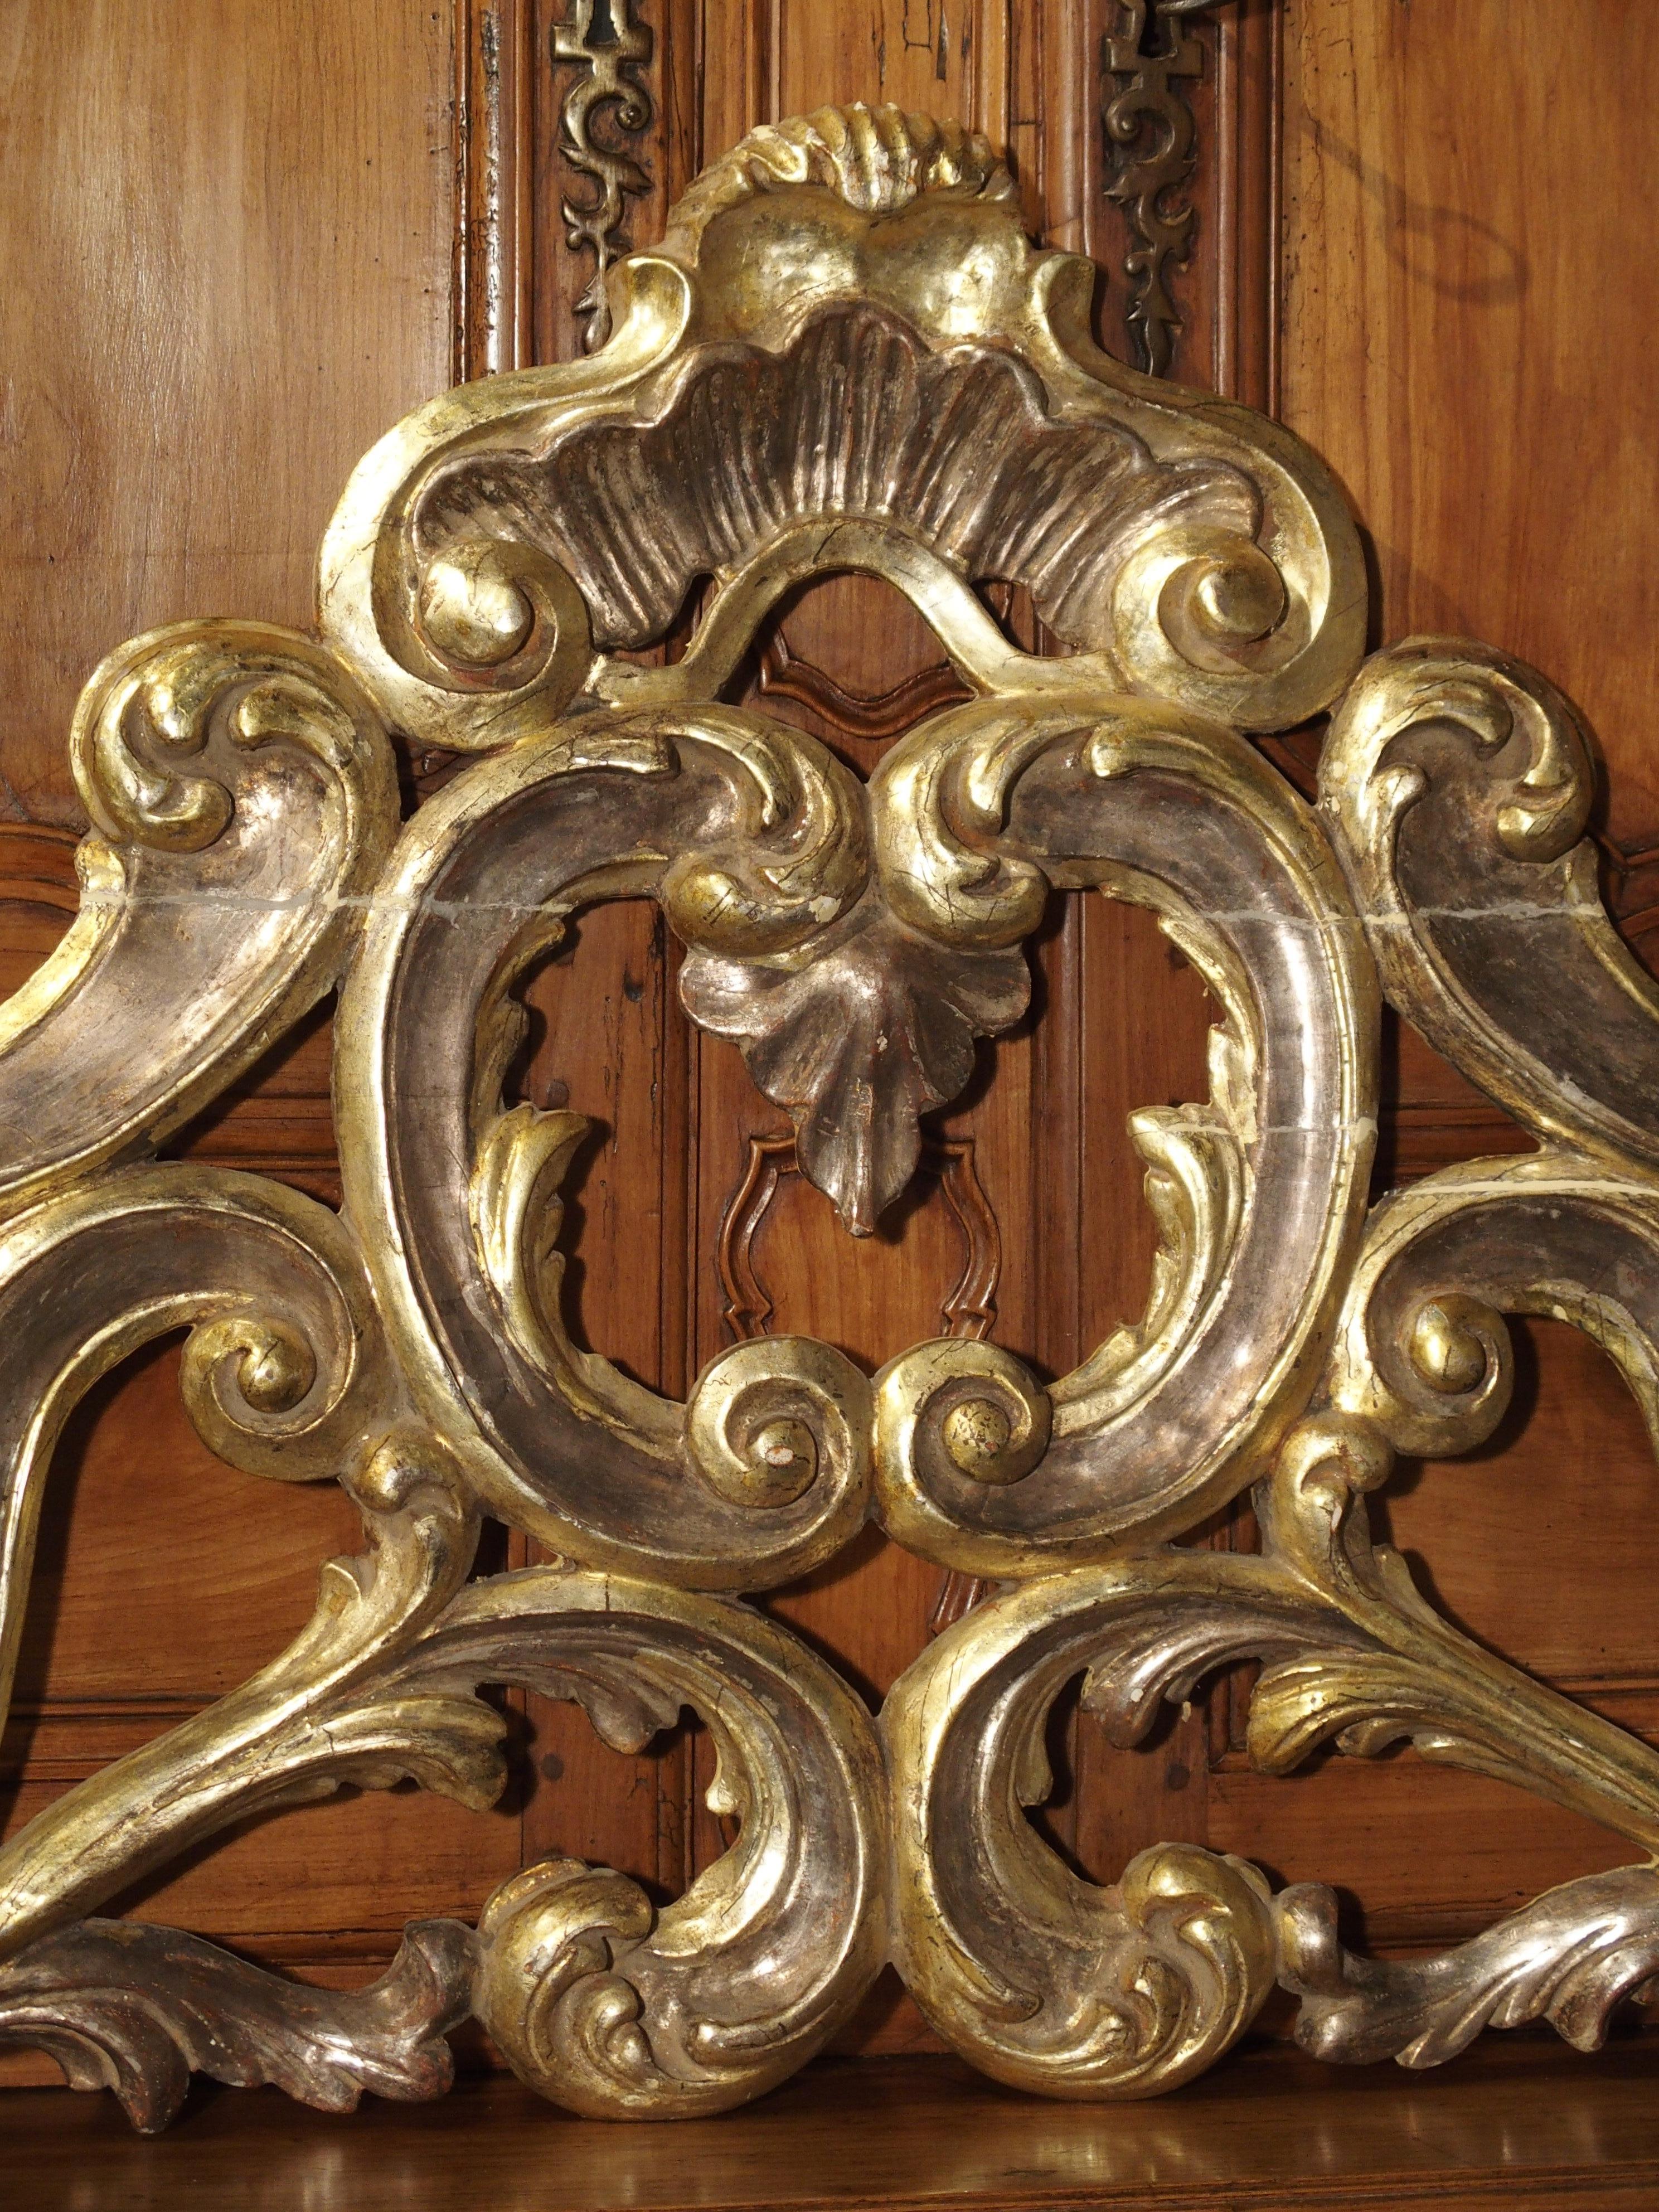 Wood Sculpted Antique Giltwood Overdoor or Headboard from Italy, circa 1850